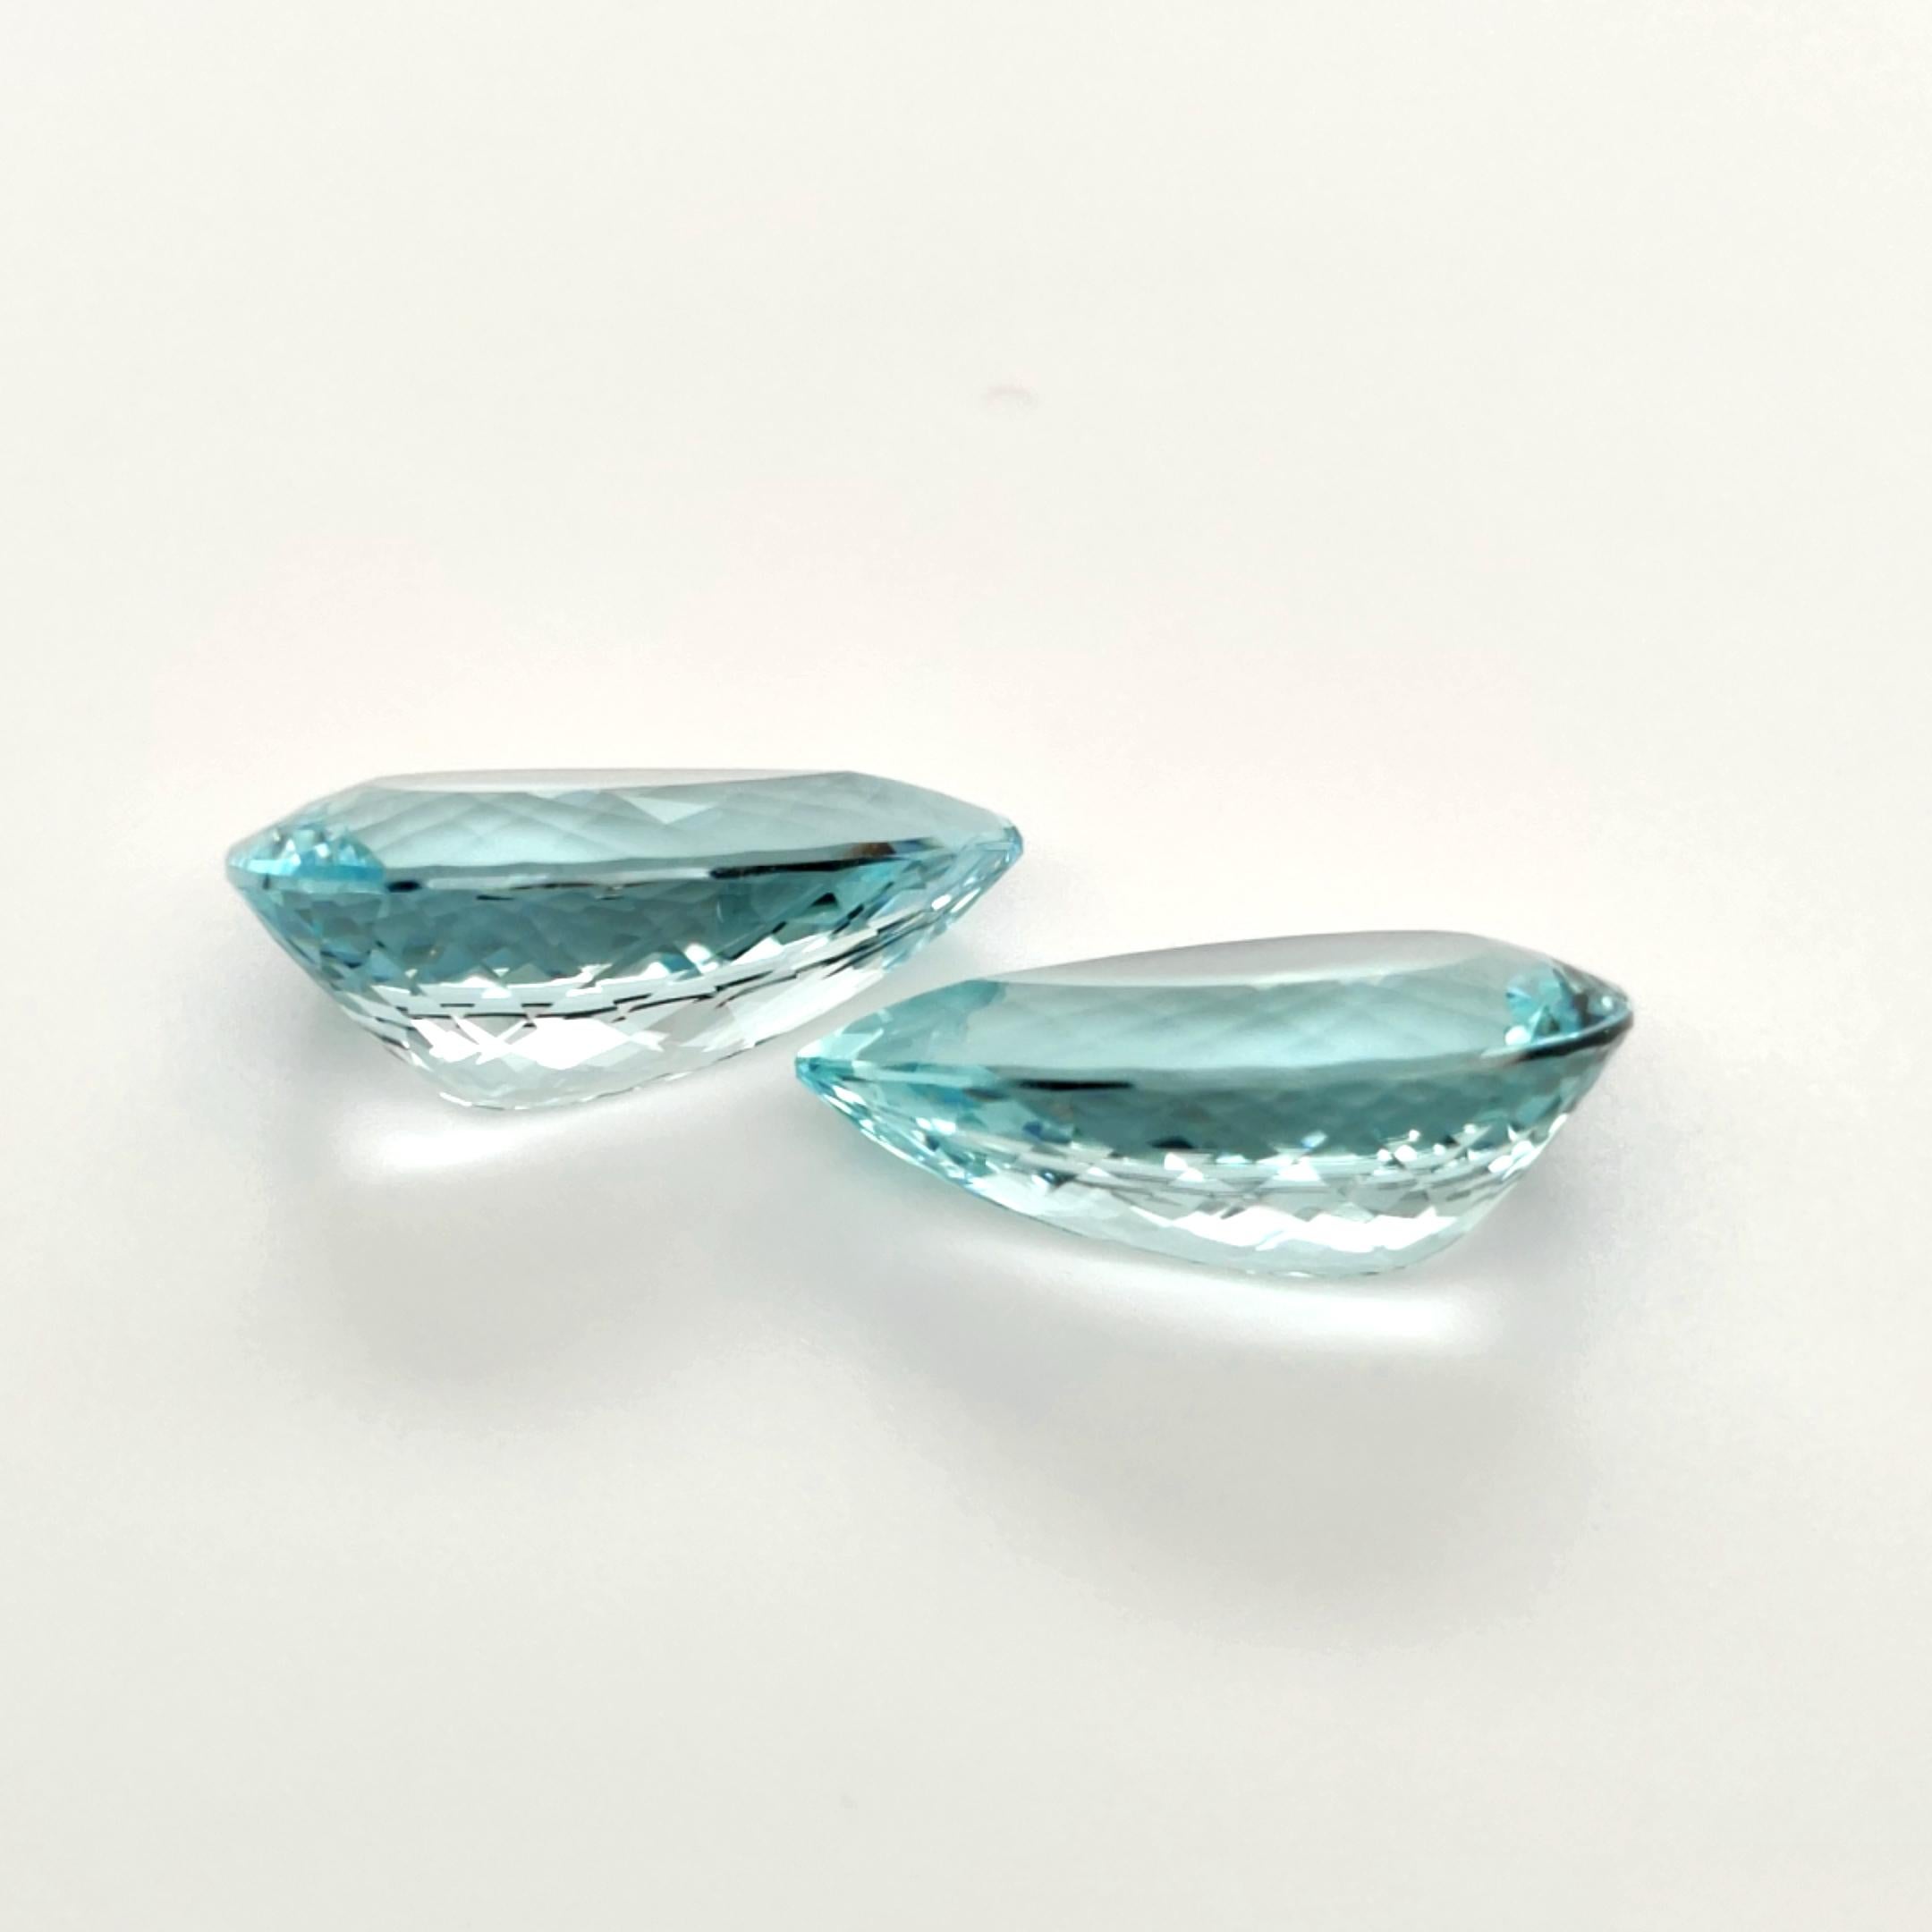 24.01 carat and 24.45 carat Paraiba Tourmaline Pear Mixed cut
Color: Ice Blue 
Provenance: Mavuco - Mozambique.
Dimensions : 25.2 x 17 x 9.8 mm and 25.2 x 17 x 10.3 mm.
Clarity: Flawless & Heated
